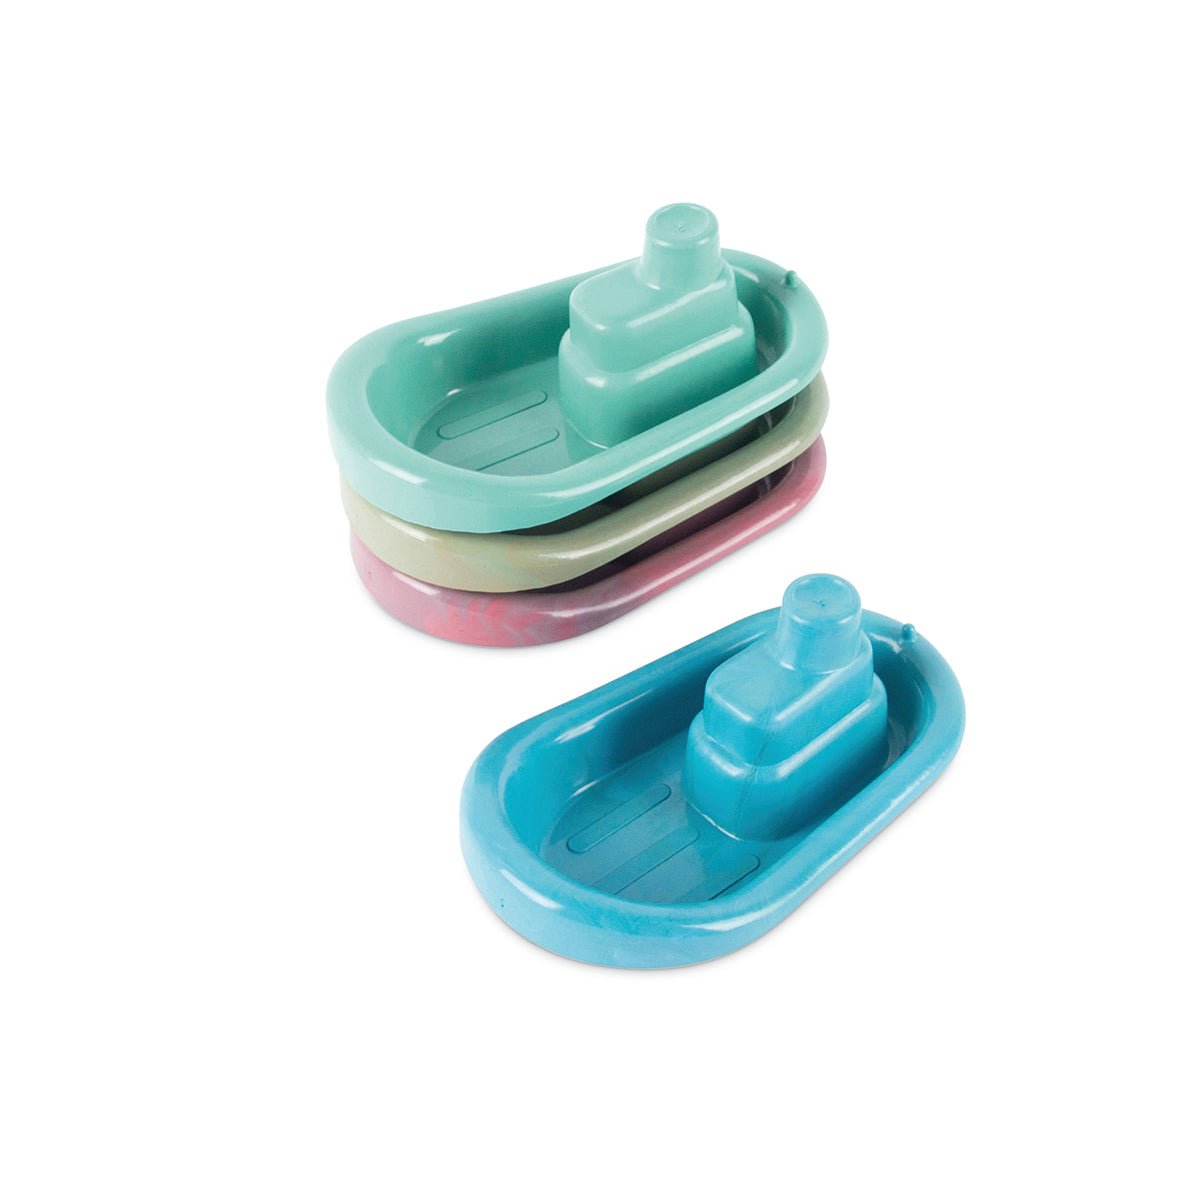 Dantoy Marine Little Boats - Preorder Tues 26th | Dantoy